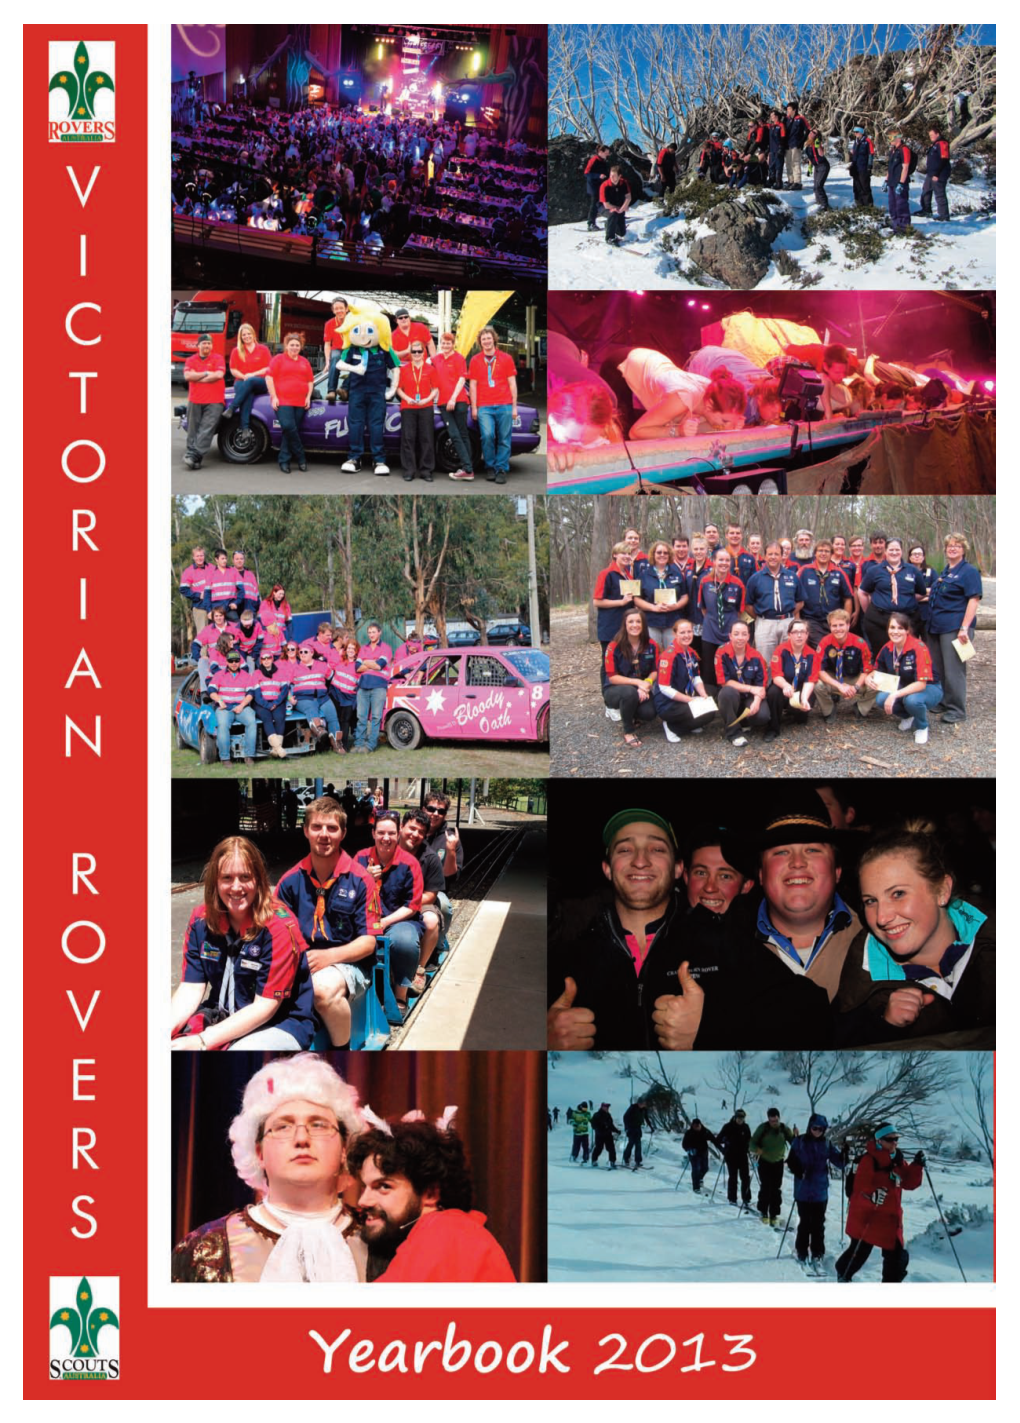 Victorian Rover Scouts Yearbook 2013